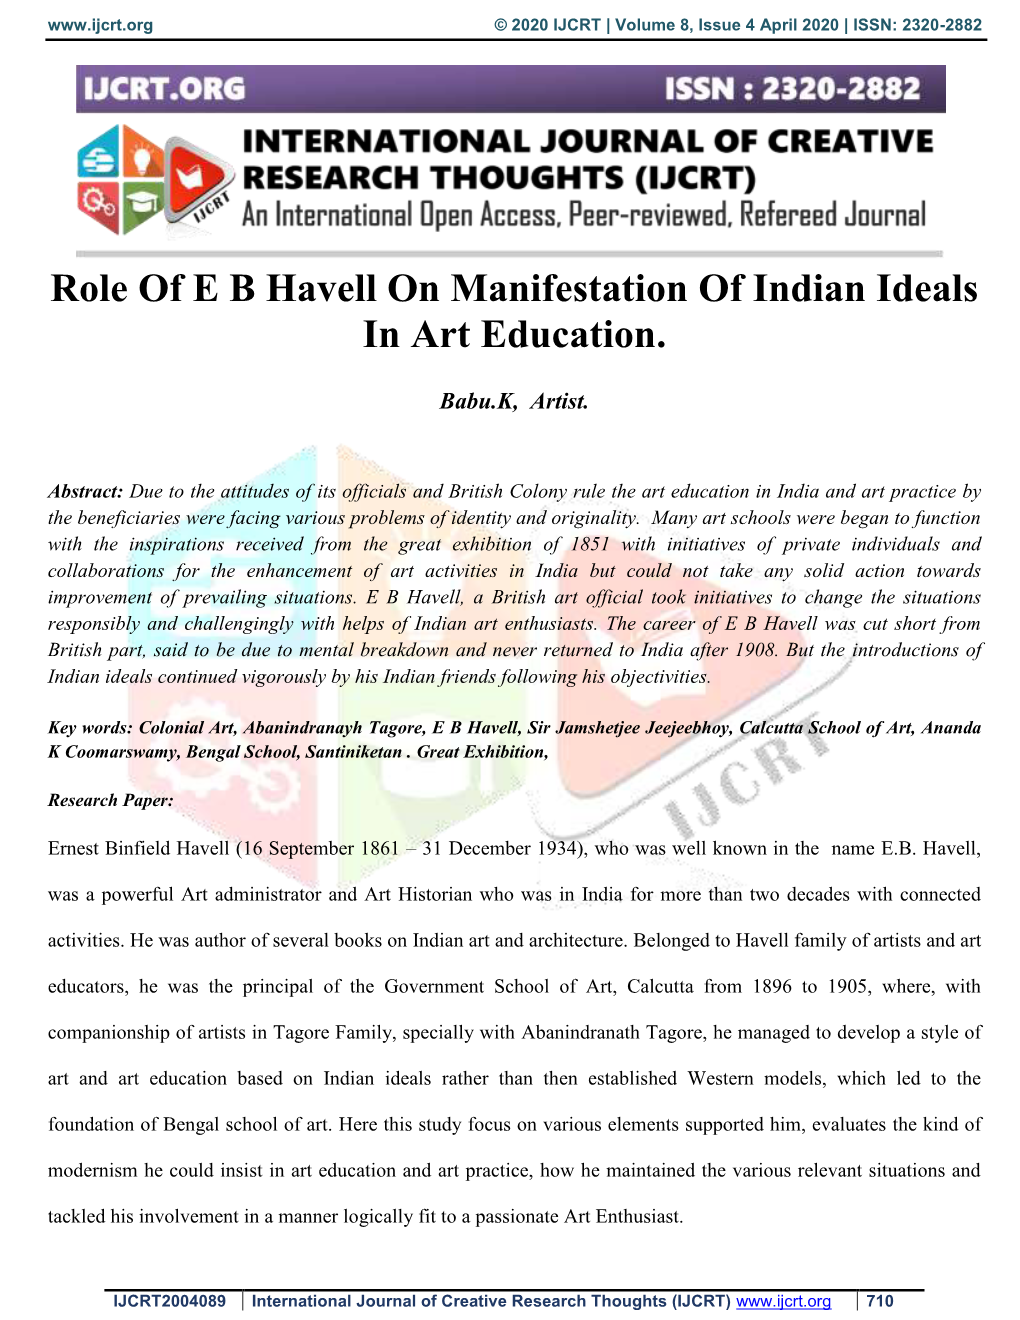 Role of E B Havell on Manifestation of Indian Ideals in Art Education